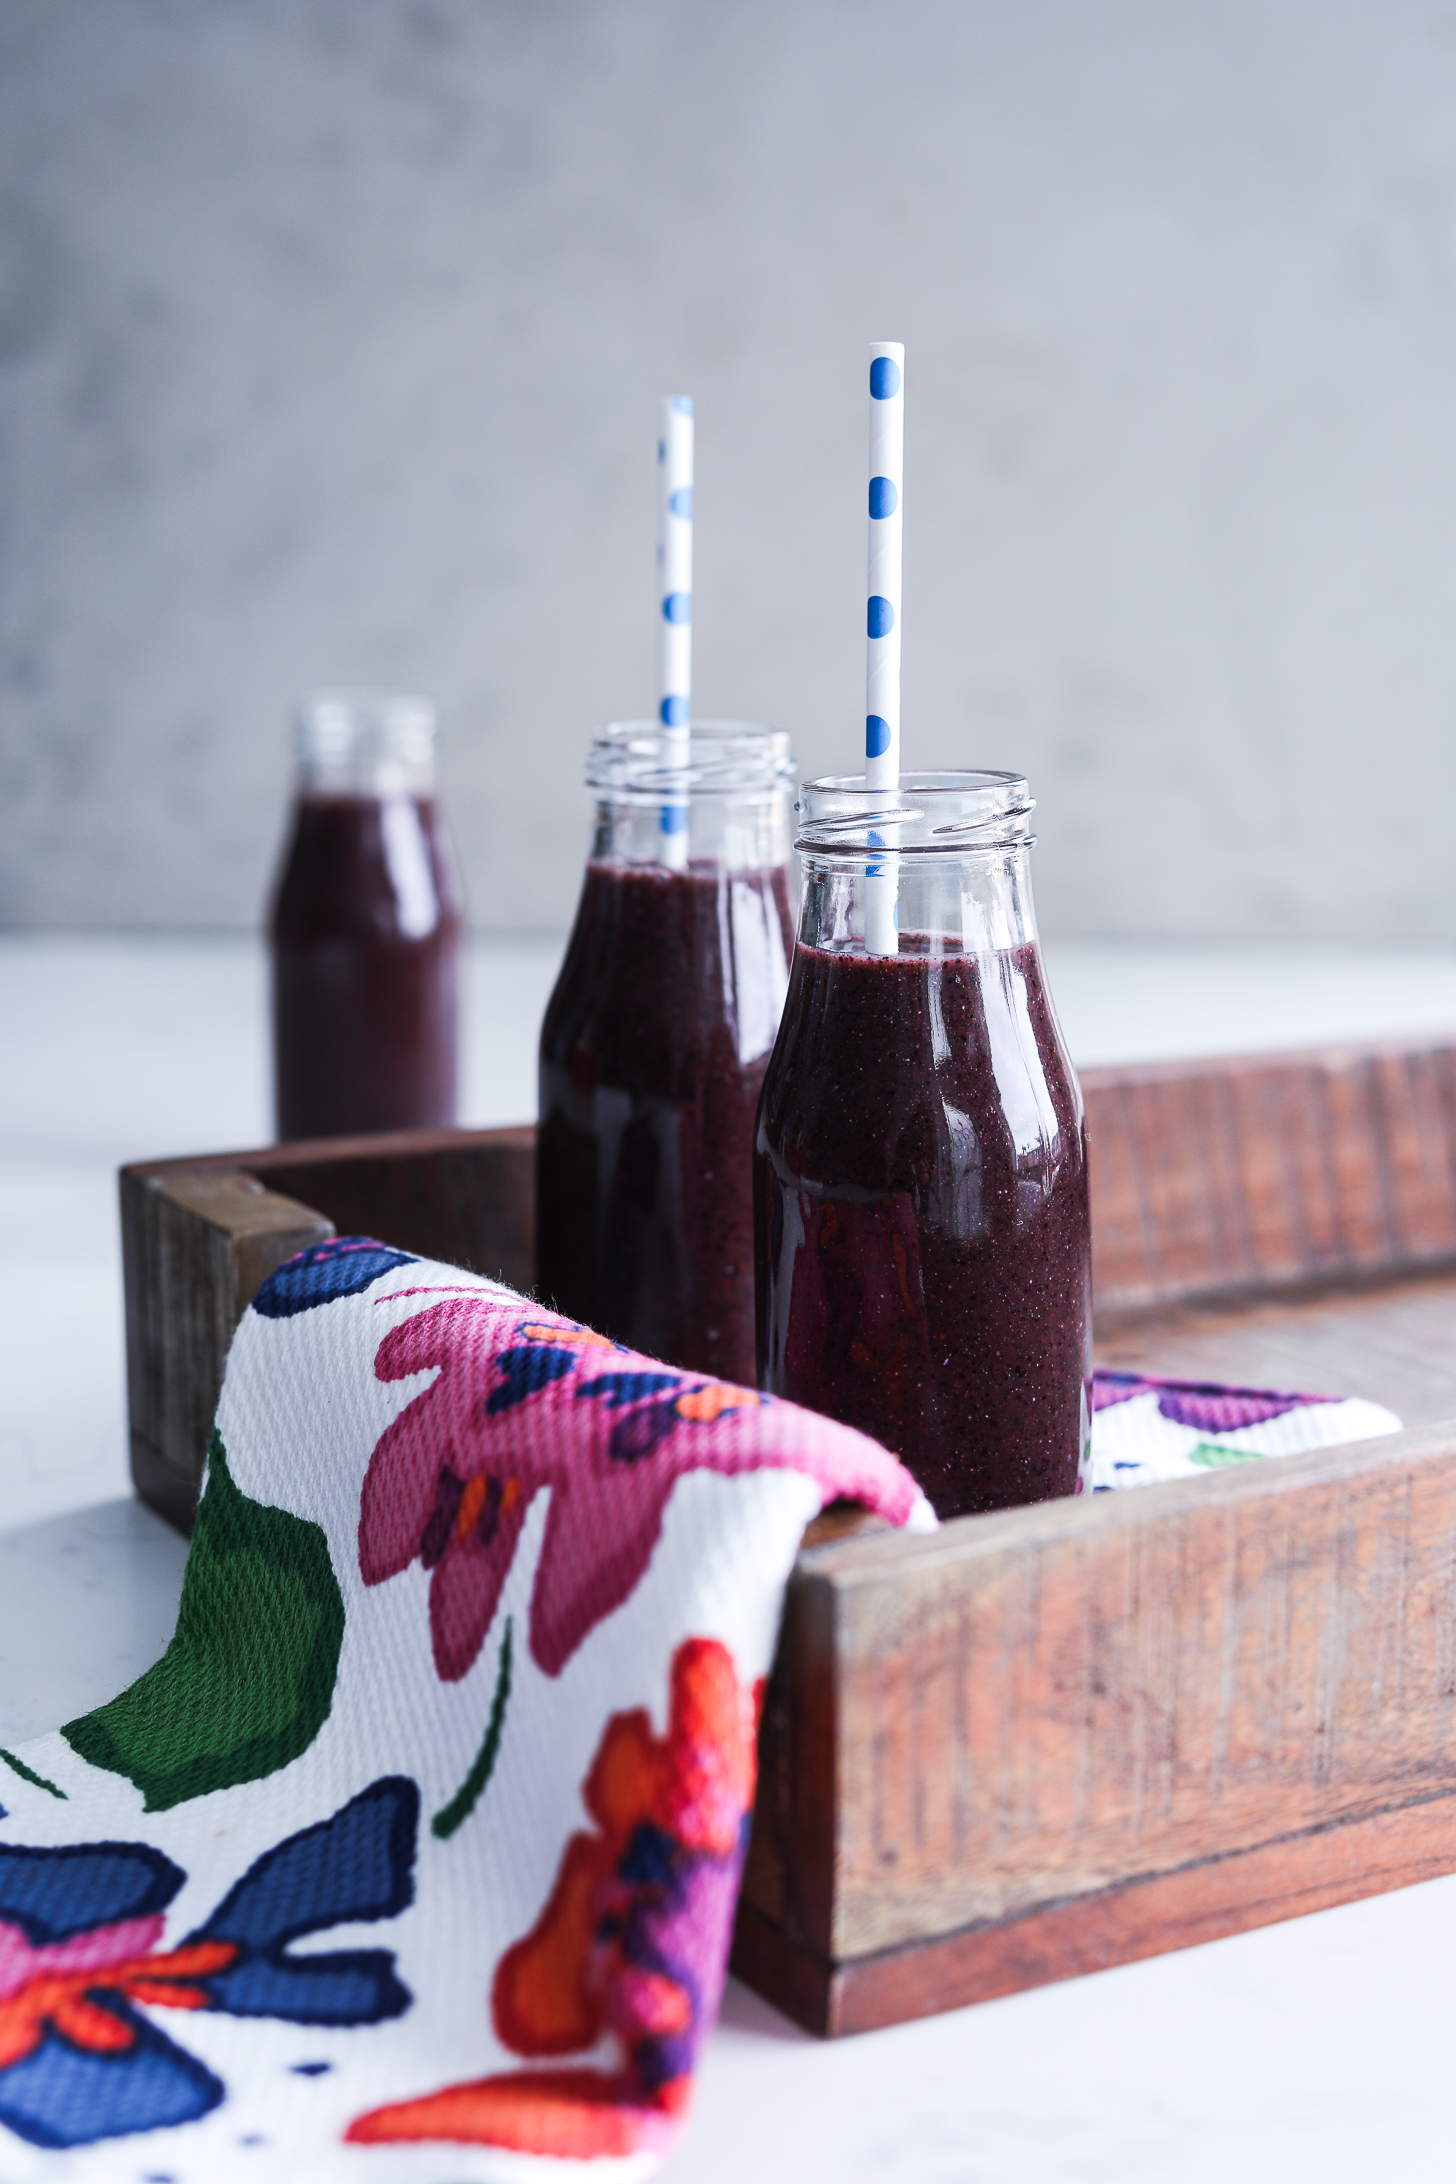 Blueberry kale smoothie in small bottles with straws on a tray, covered by a cloth extending out.